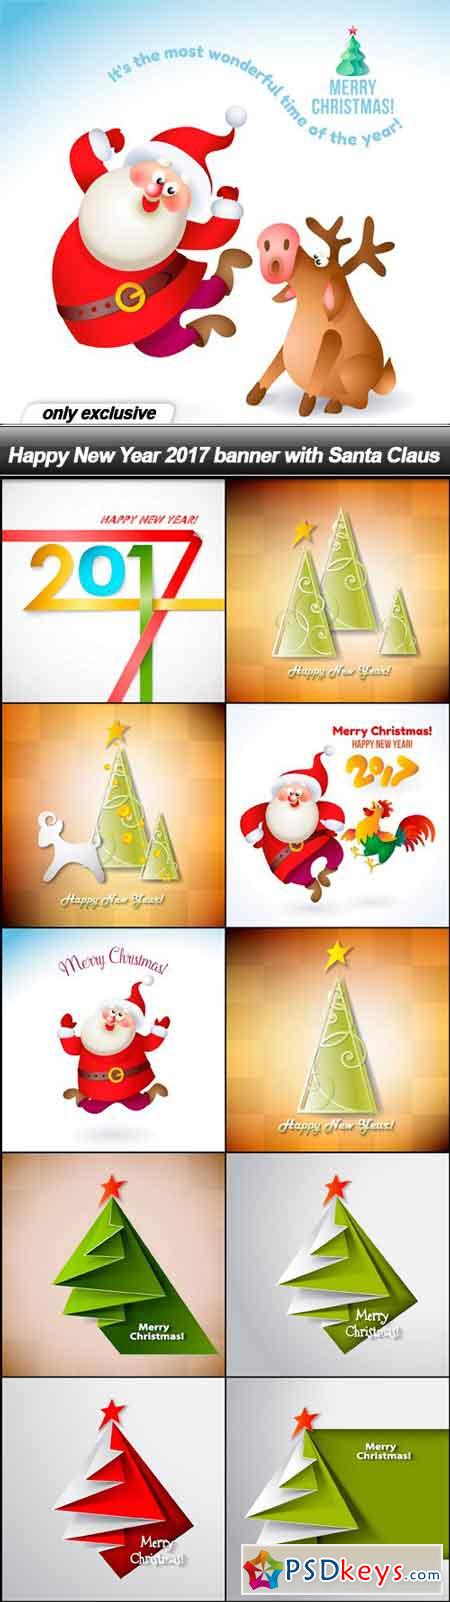 Happy New Year 2017 banner with Santa Claus - 11 EPS